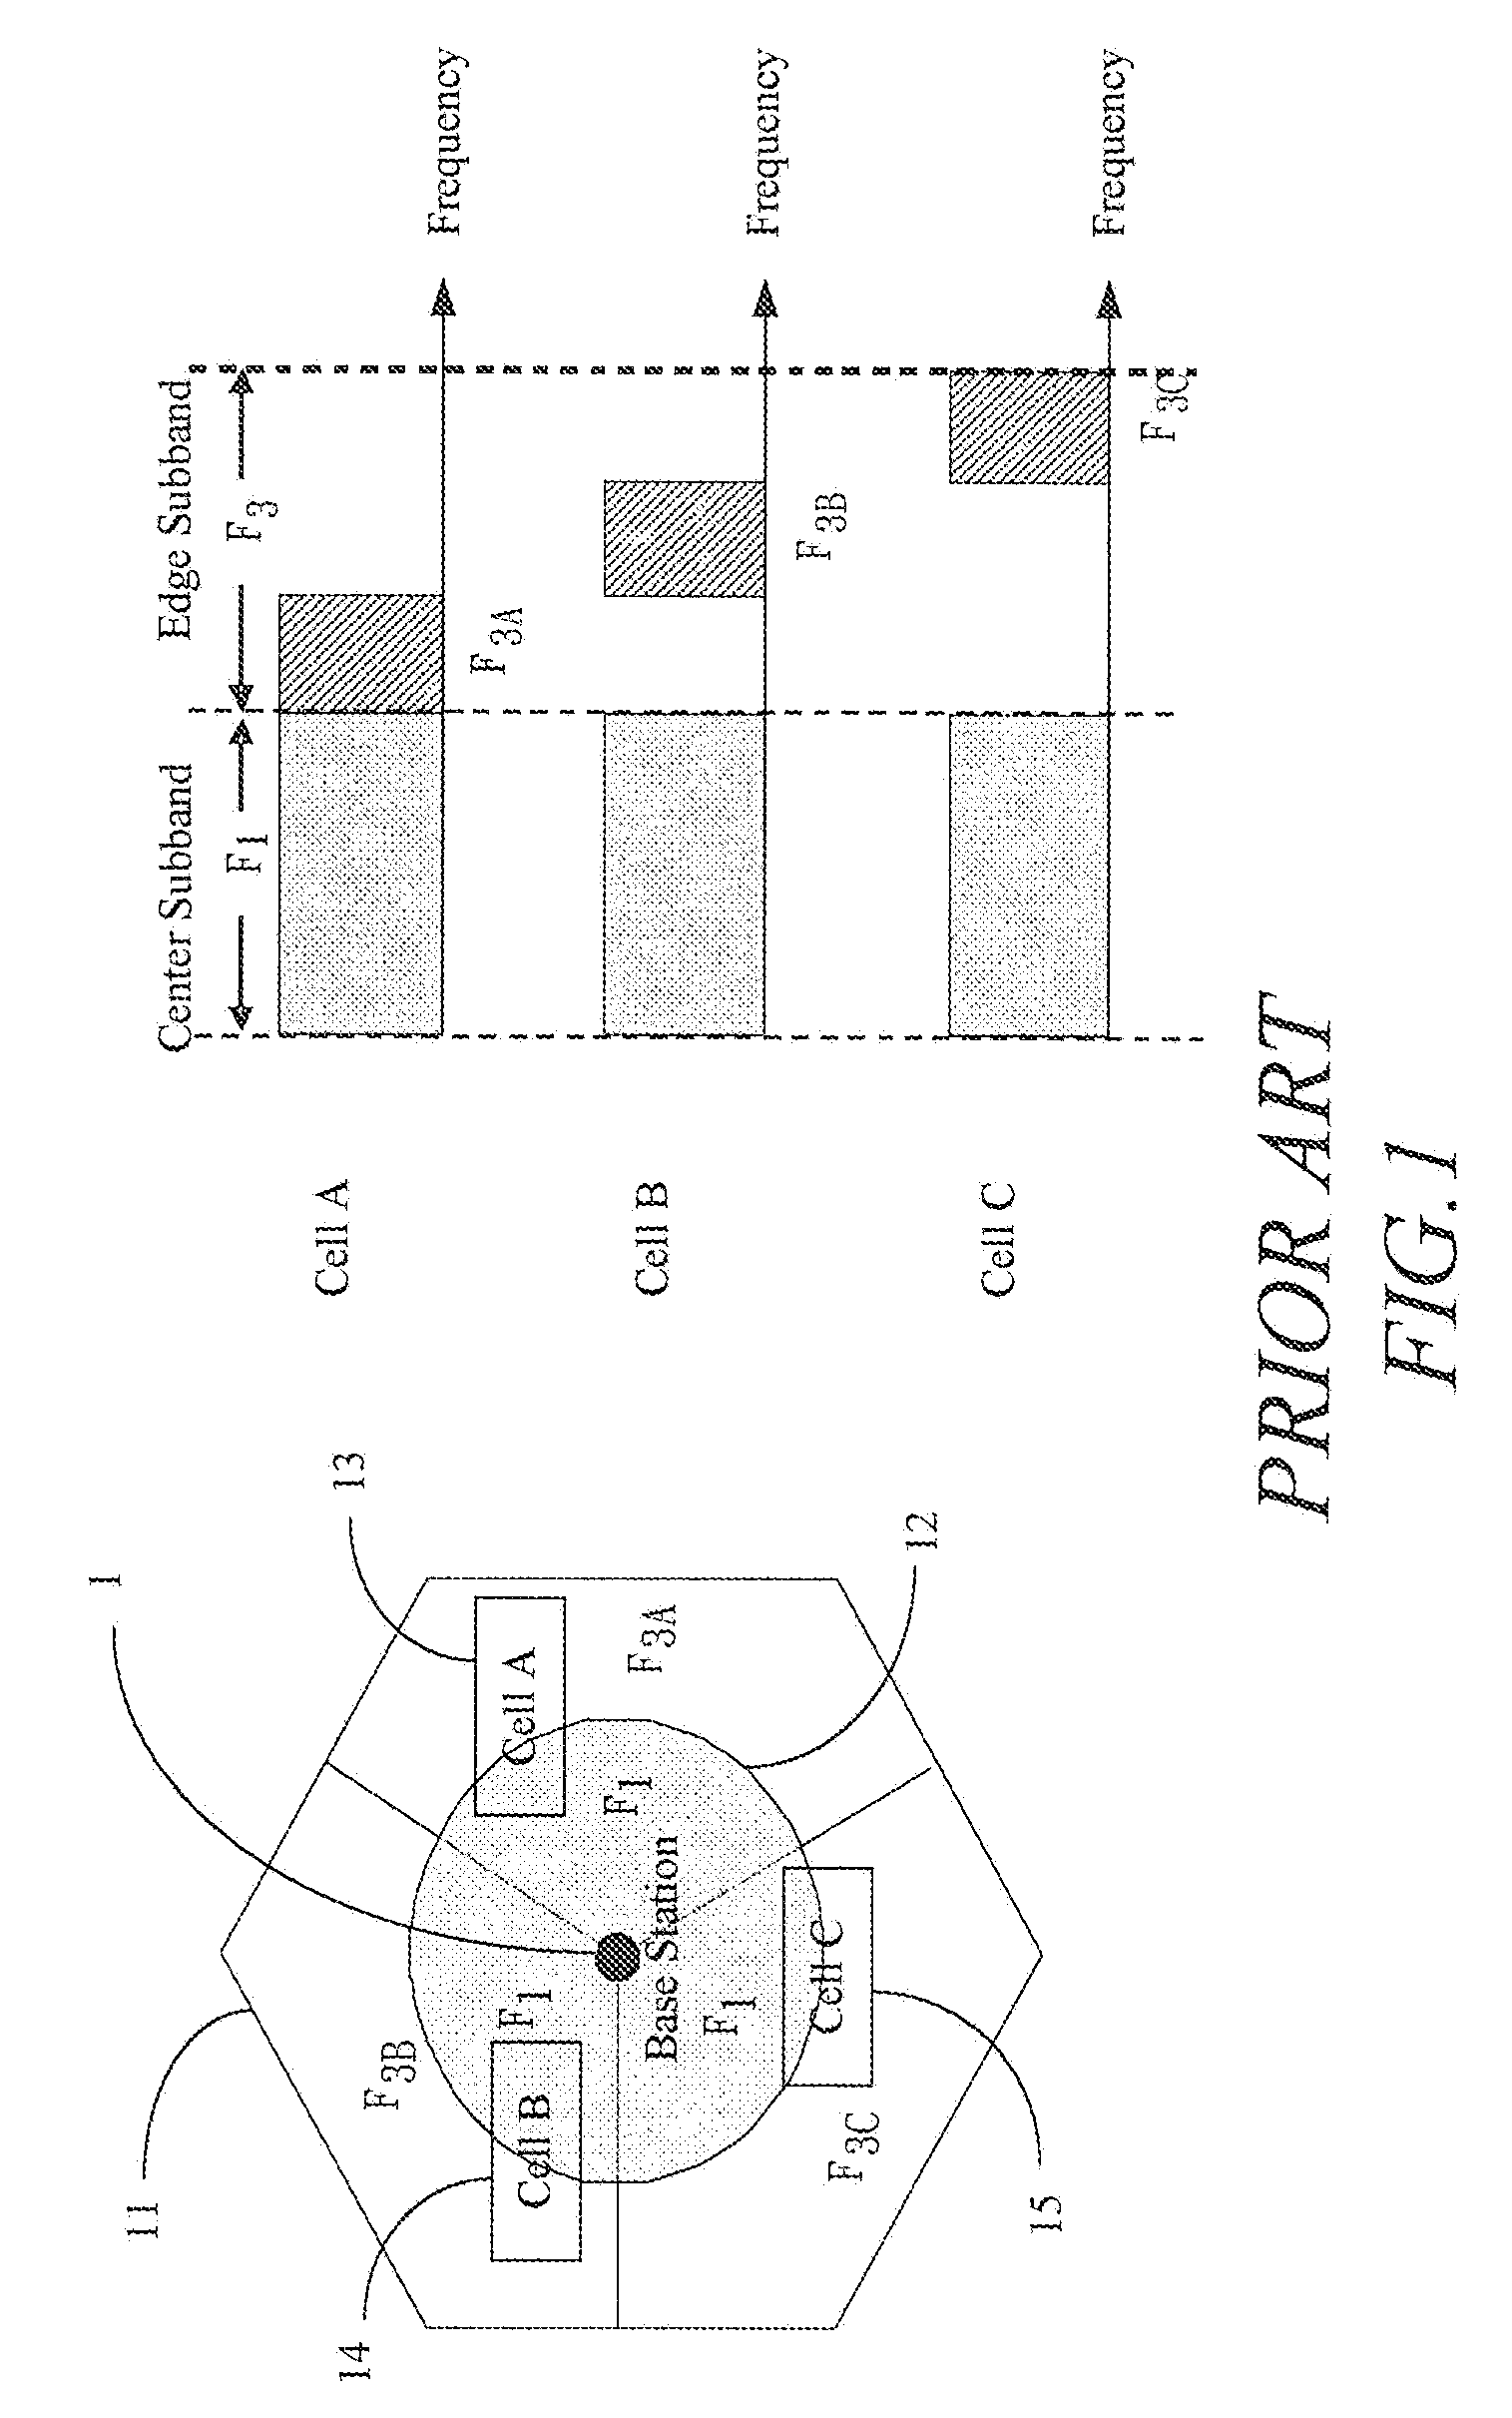 User Grouping Method For Inter-cell Interference Coordination in Mobile Telecommunication